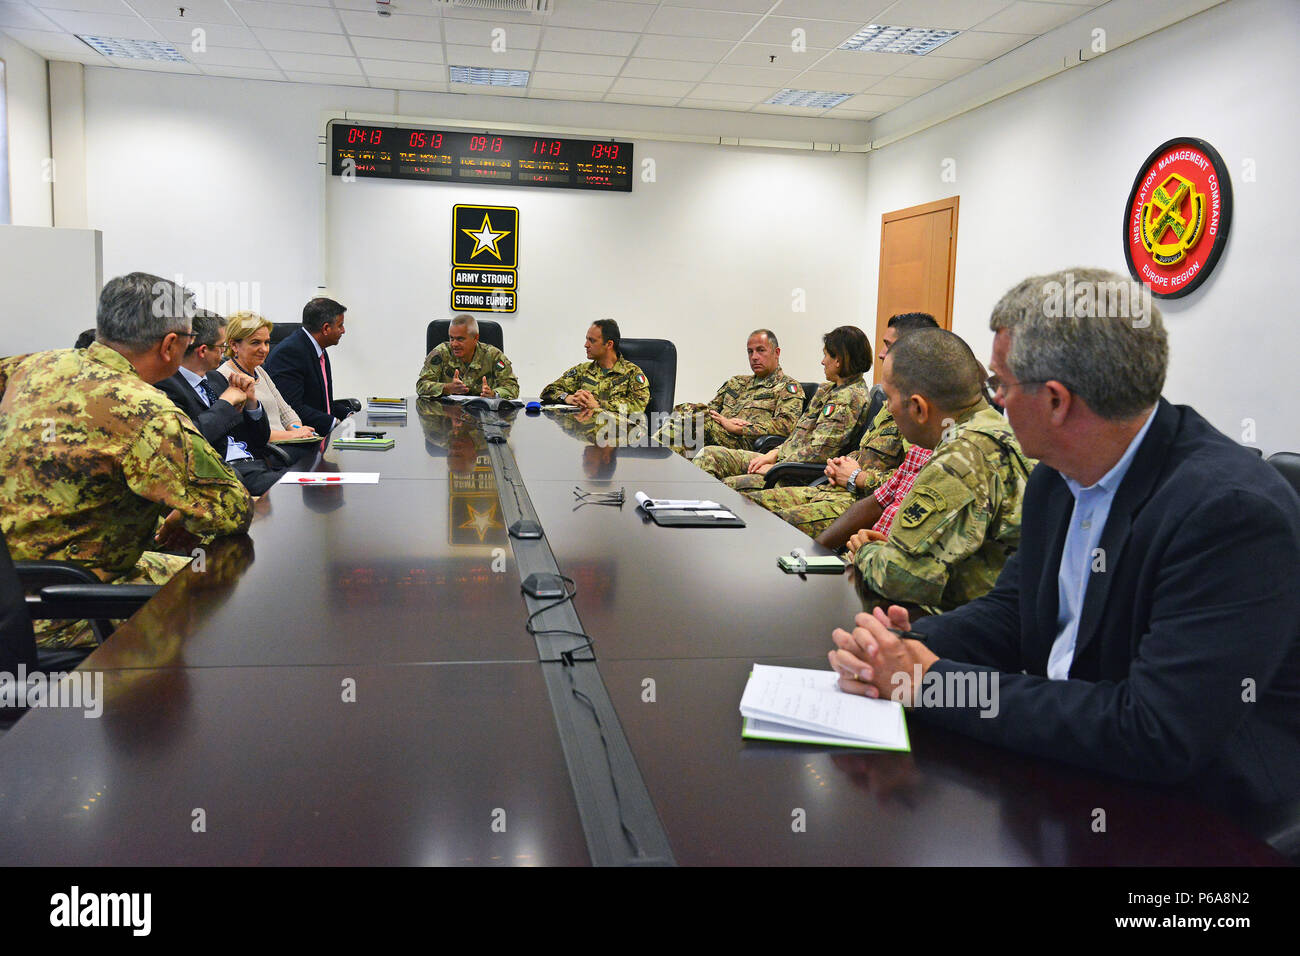 At the center Italian Army Colonel Federico Pognant Airassa, Public Information Officer Land forces Operational Command (COMFOTER),speaks during the meeting media strategies in Caserma Ederle, Vicenza, Italy, May 31, 2016 with delegation of the U.S. Army and Italian Army staff. Italian Army visit U.S. Army, in order to enhance to bilateral relations and to expand levels of cooperation and the capacity of the personnel involved in joint operations. (Photo by Visual Information Specialist Paolo Bovo/Released) Stock Photo